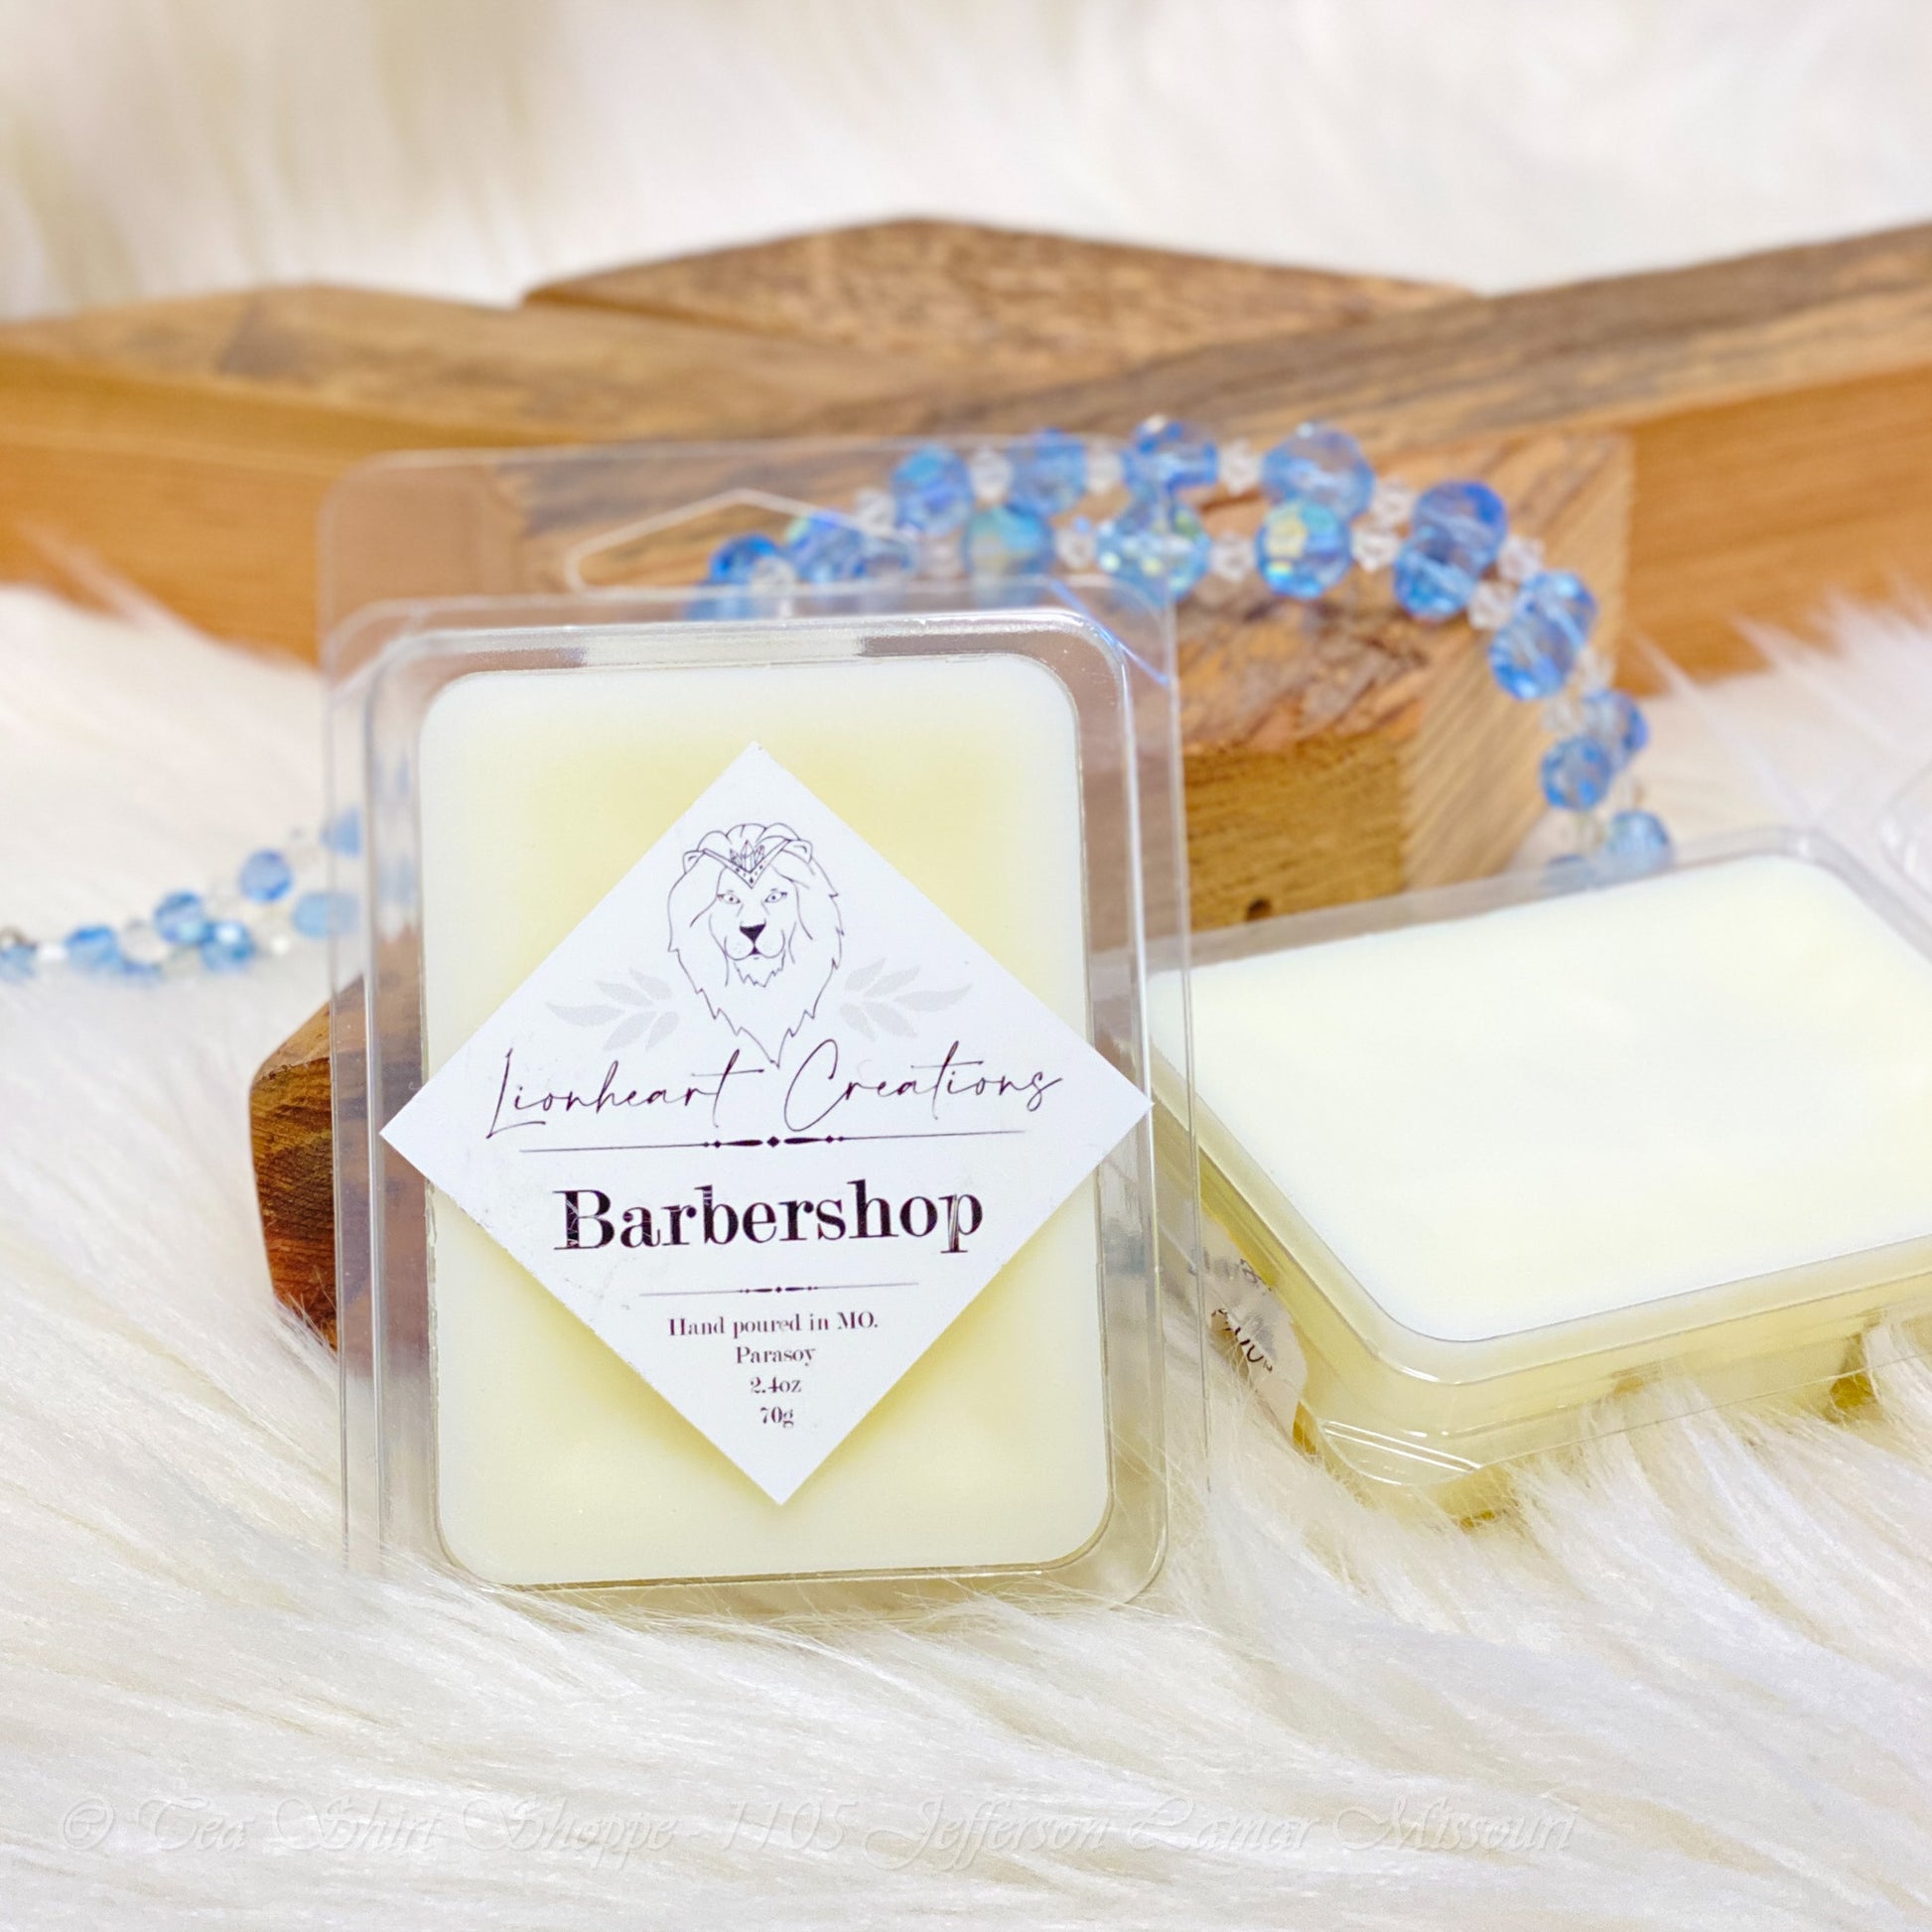 Barbershop Scented Wax Melt Our Barbershop Wax Melt is like taking a trip back in time! You’ll love the old-fashioned feel of this classic fragrance, featuring the cool mint of traditional shaving cream blended with the rich smell of leather from barber aprons. 